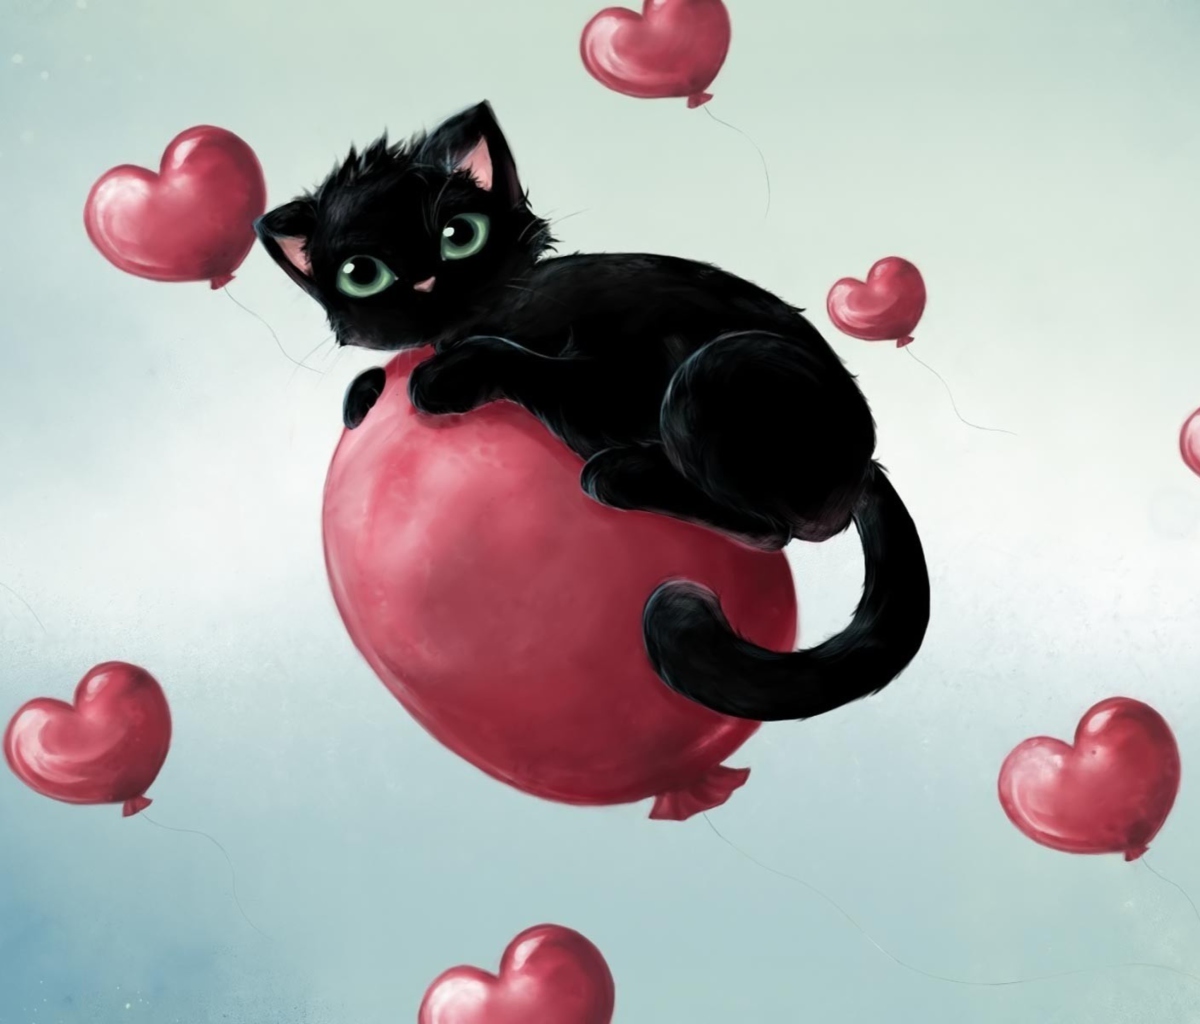 Das Black Kitty And Red Heart Balloons Wallpaper 1200x1024